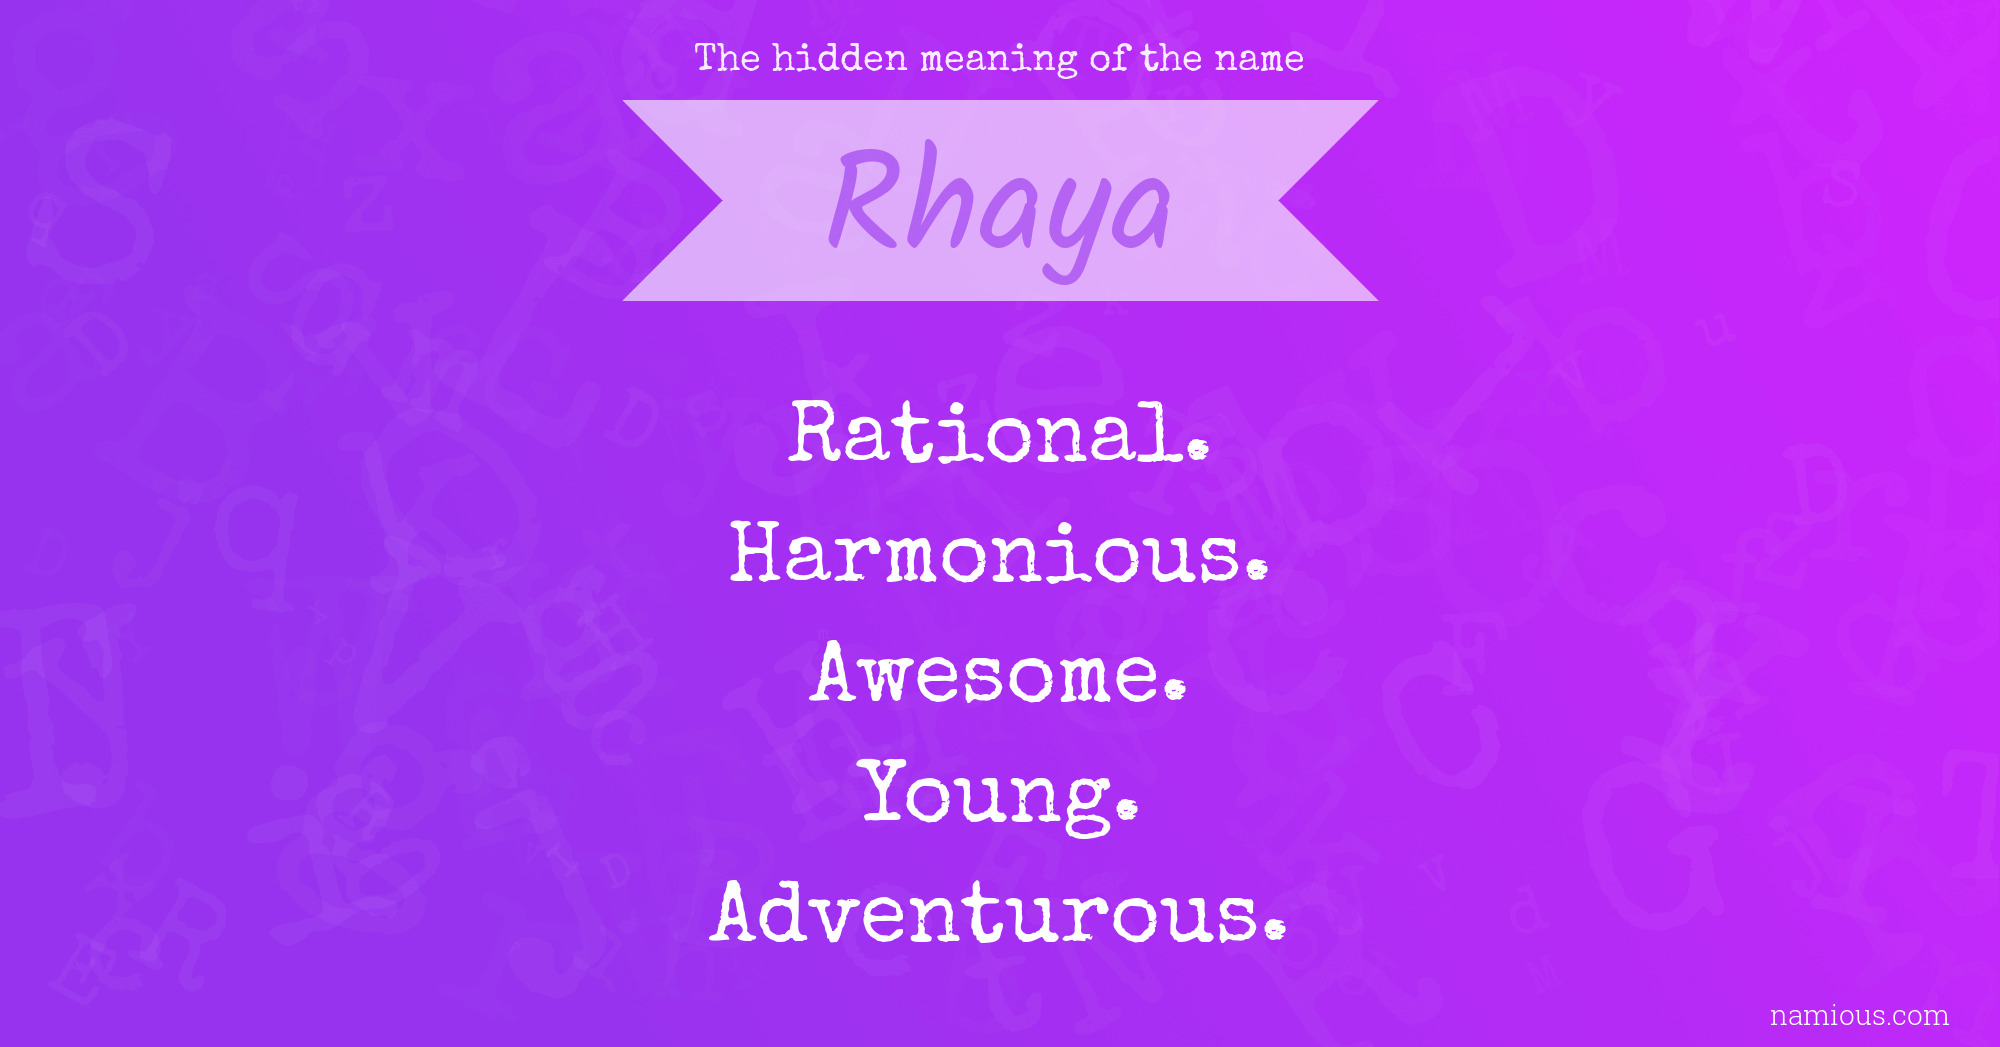 The hidden meaning of the name Rhaya